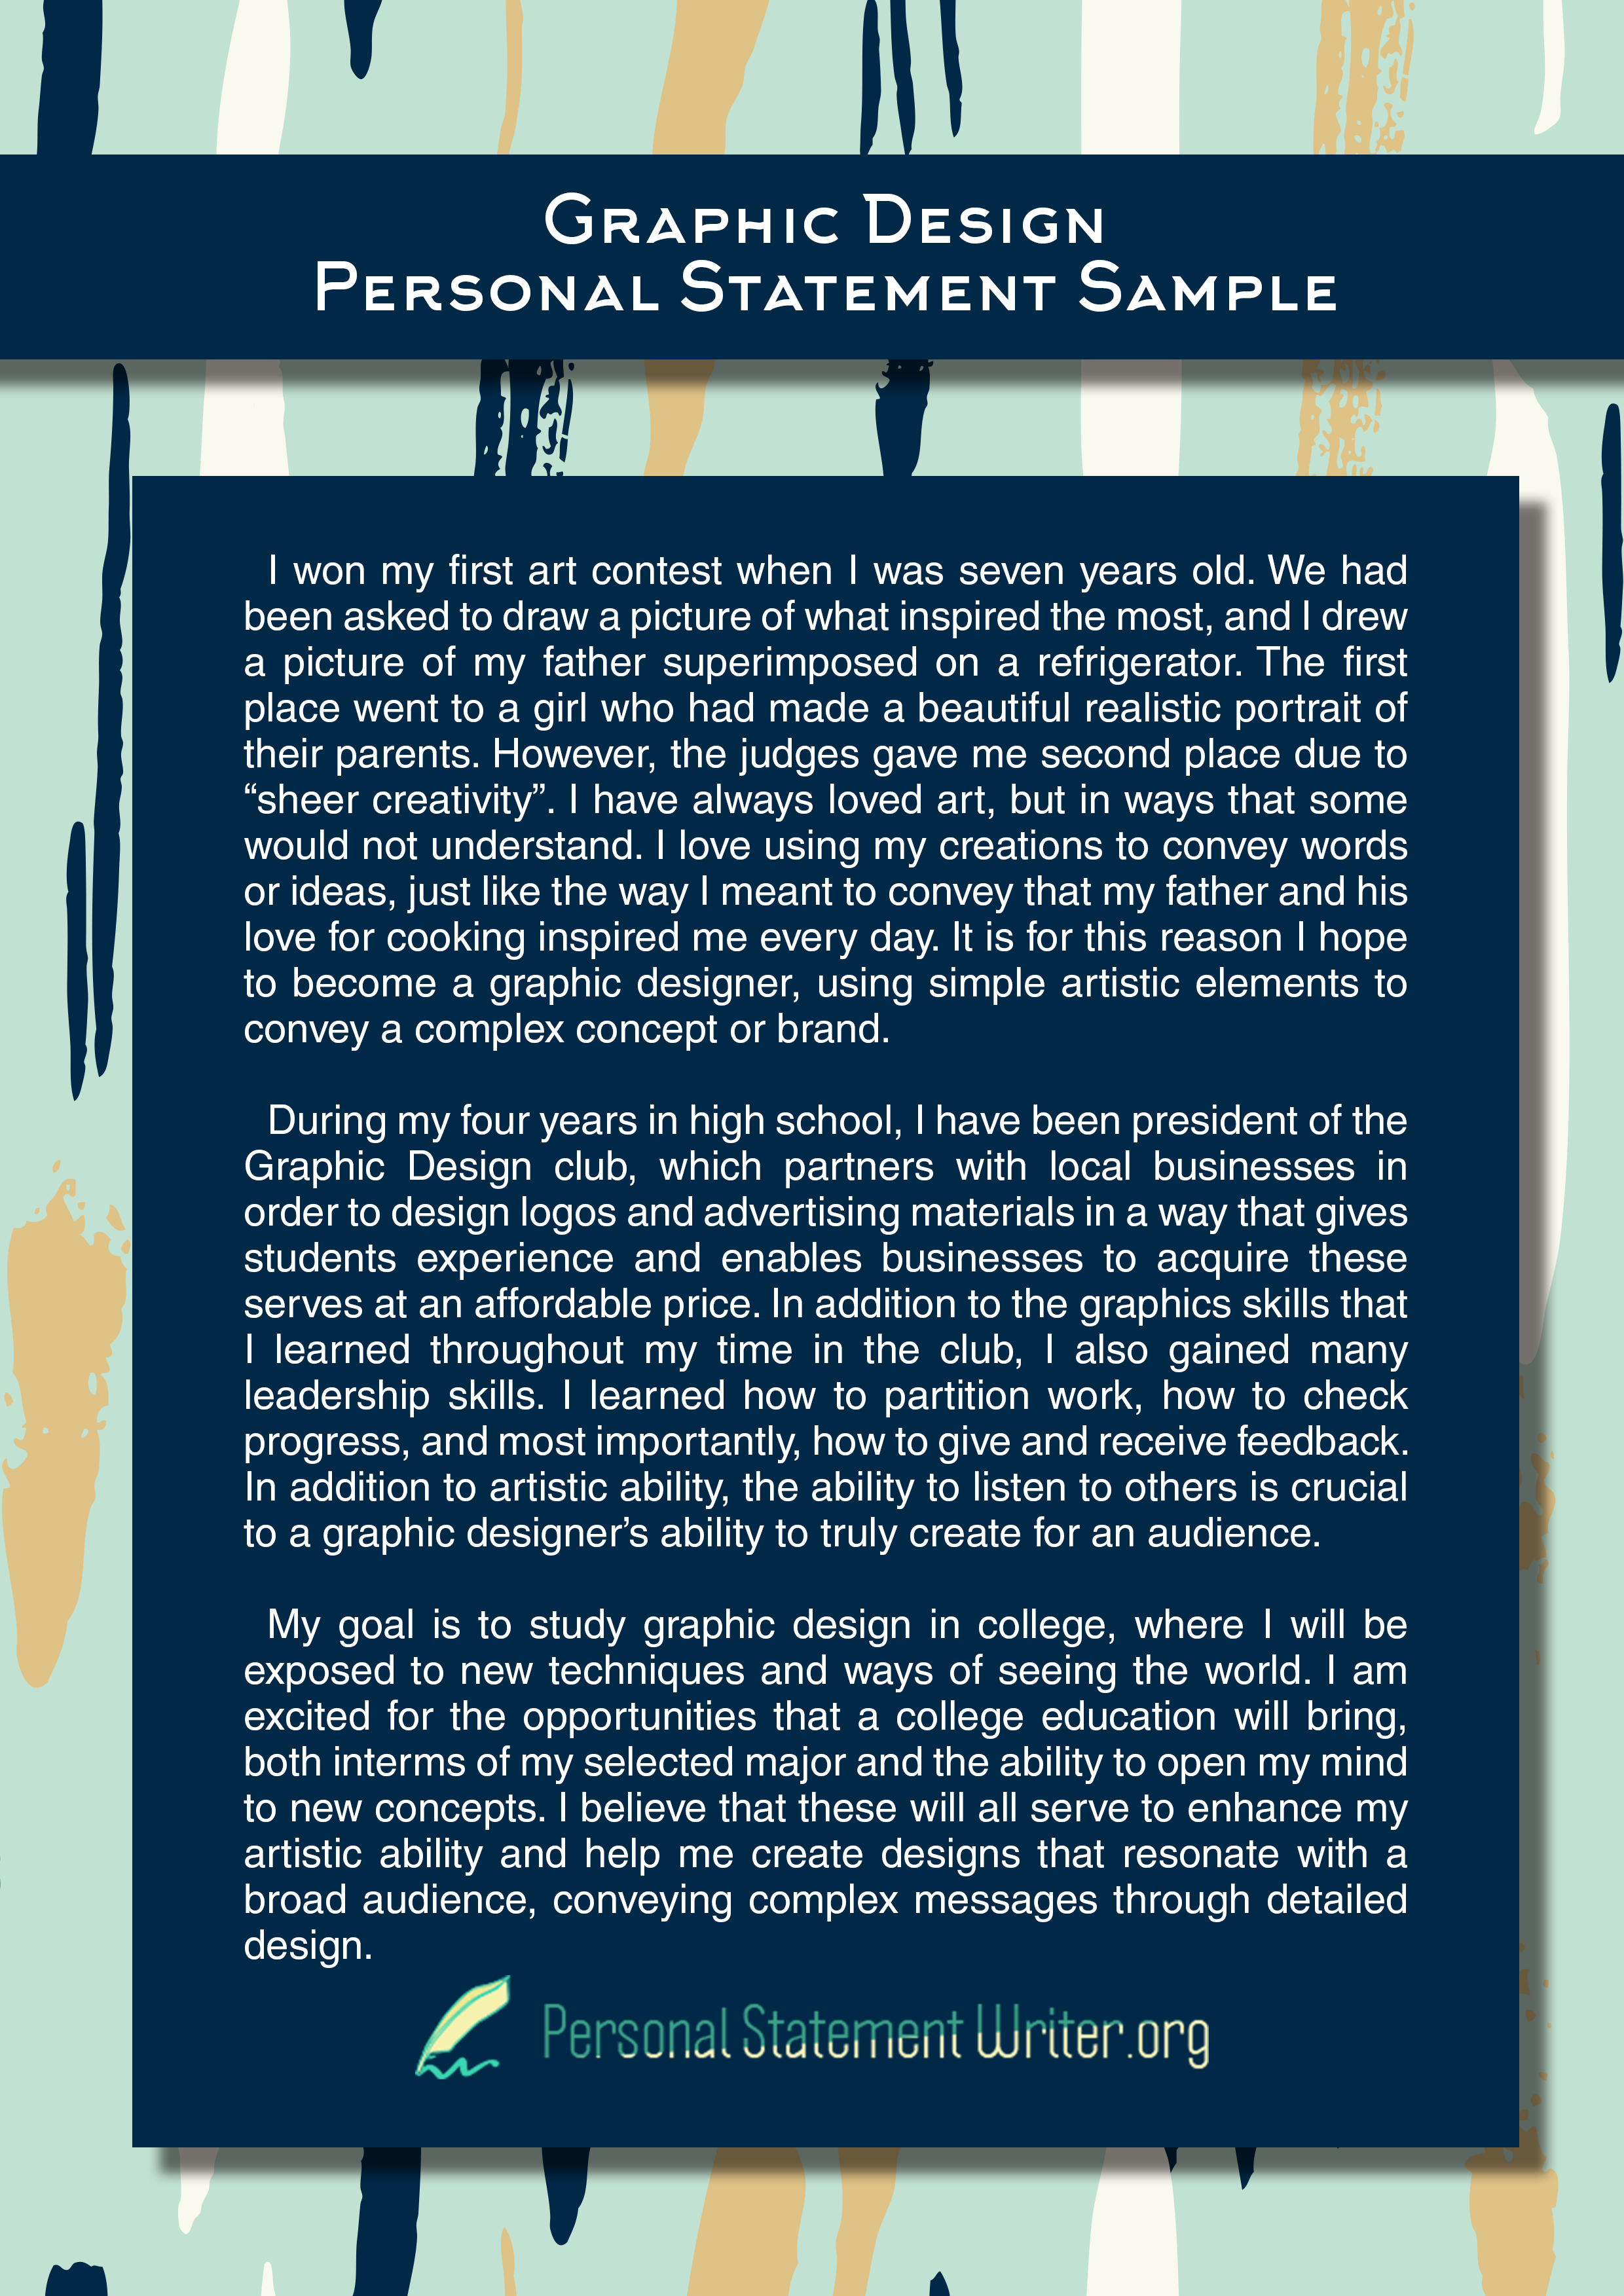 Graphic Design Personal Statement Writing to Make You Stand Out